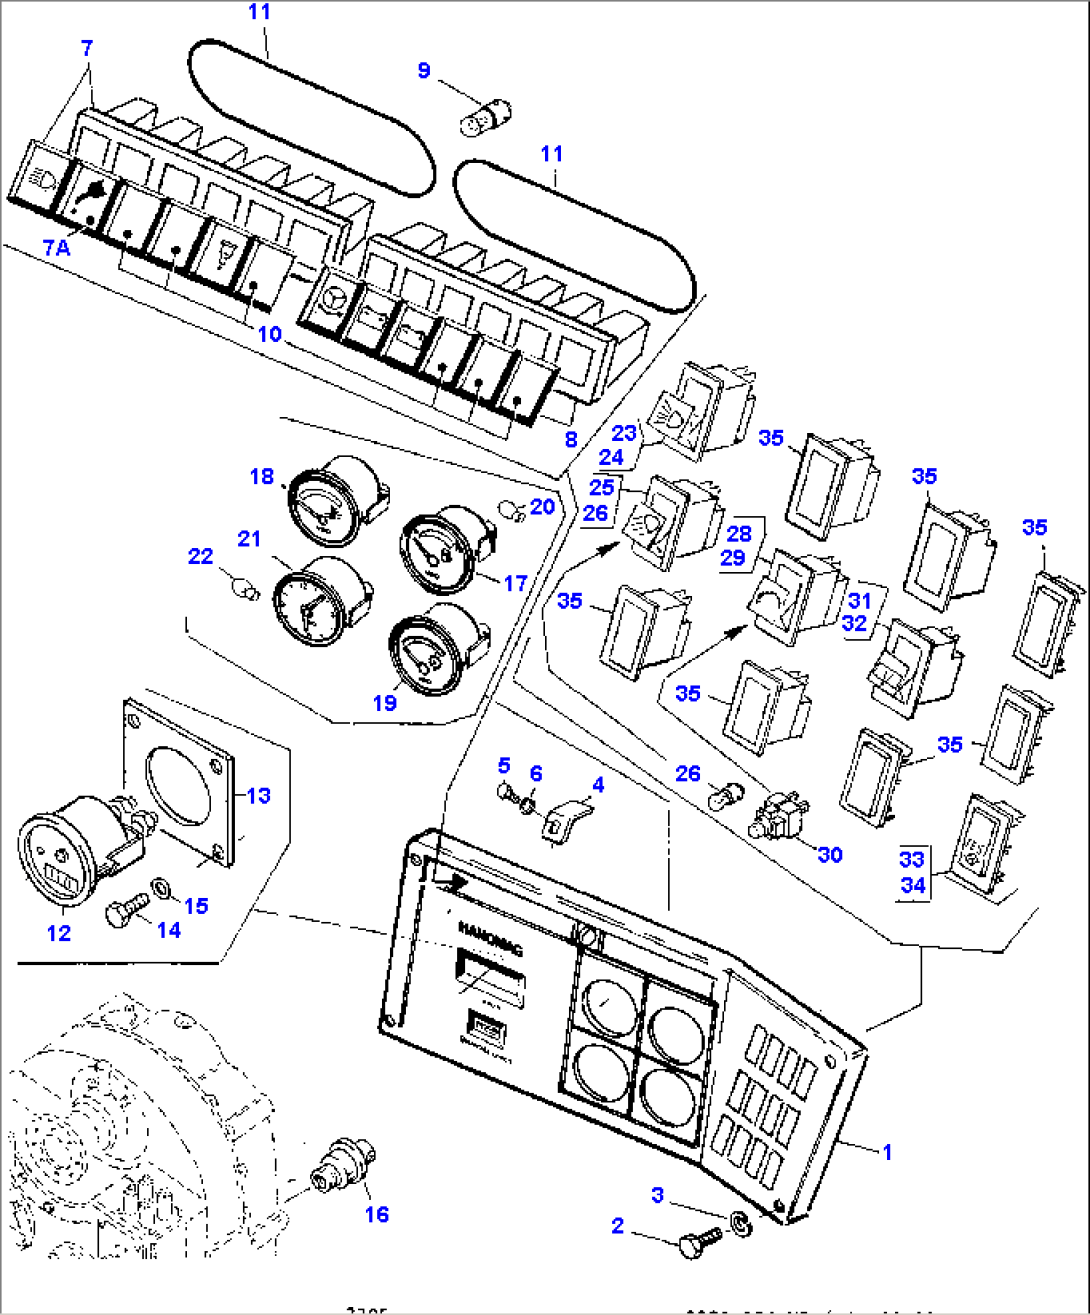 INSTRUMENT PANEL AND INSTRUMENTS